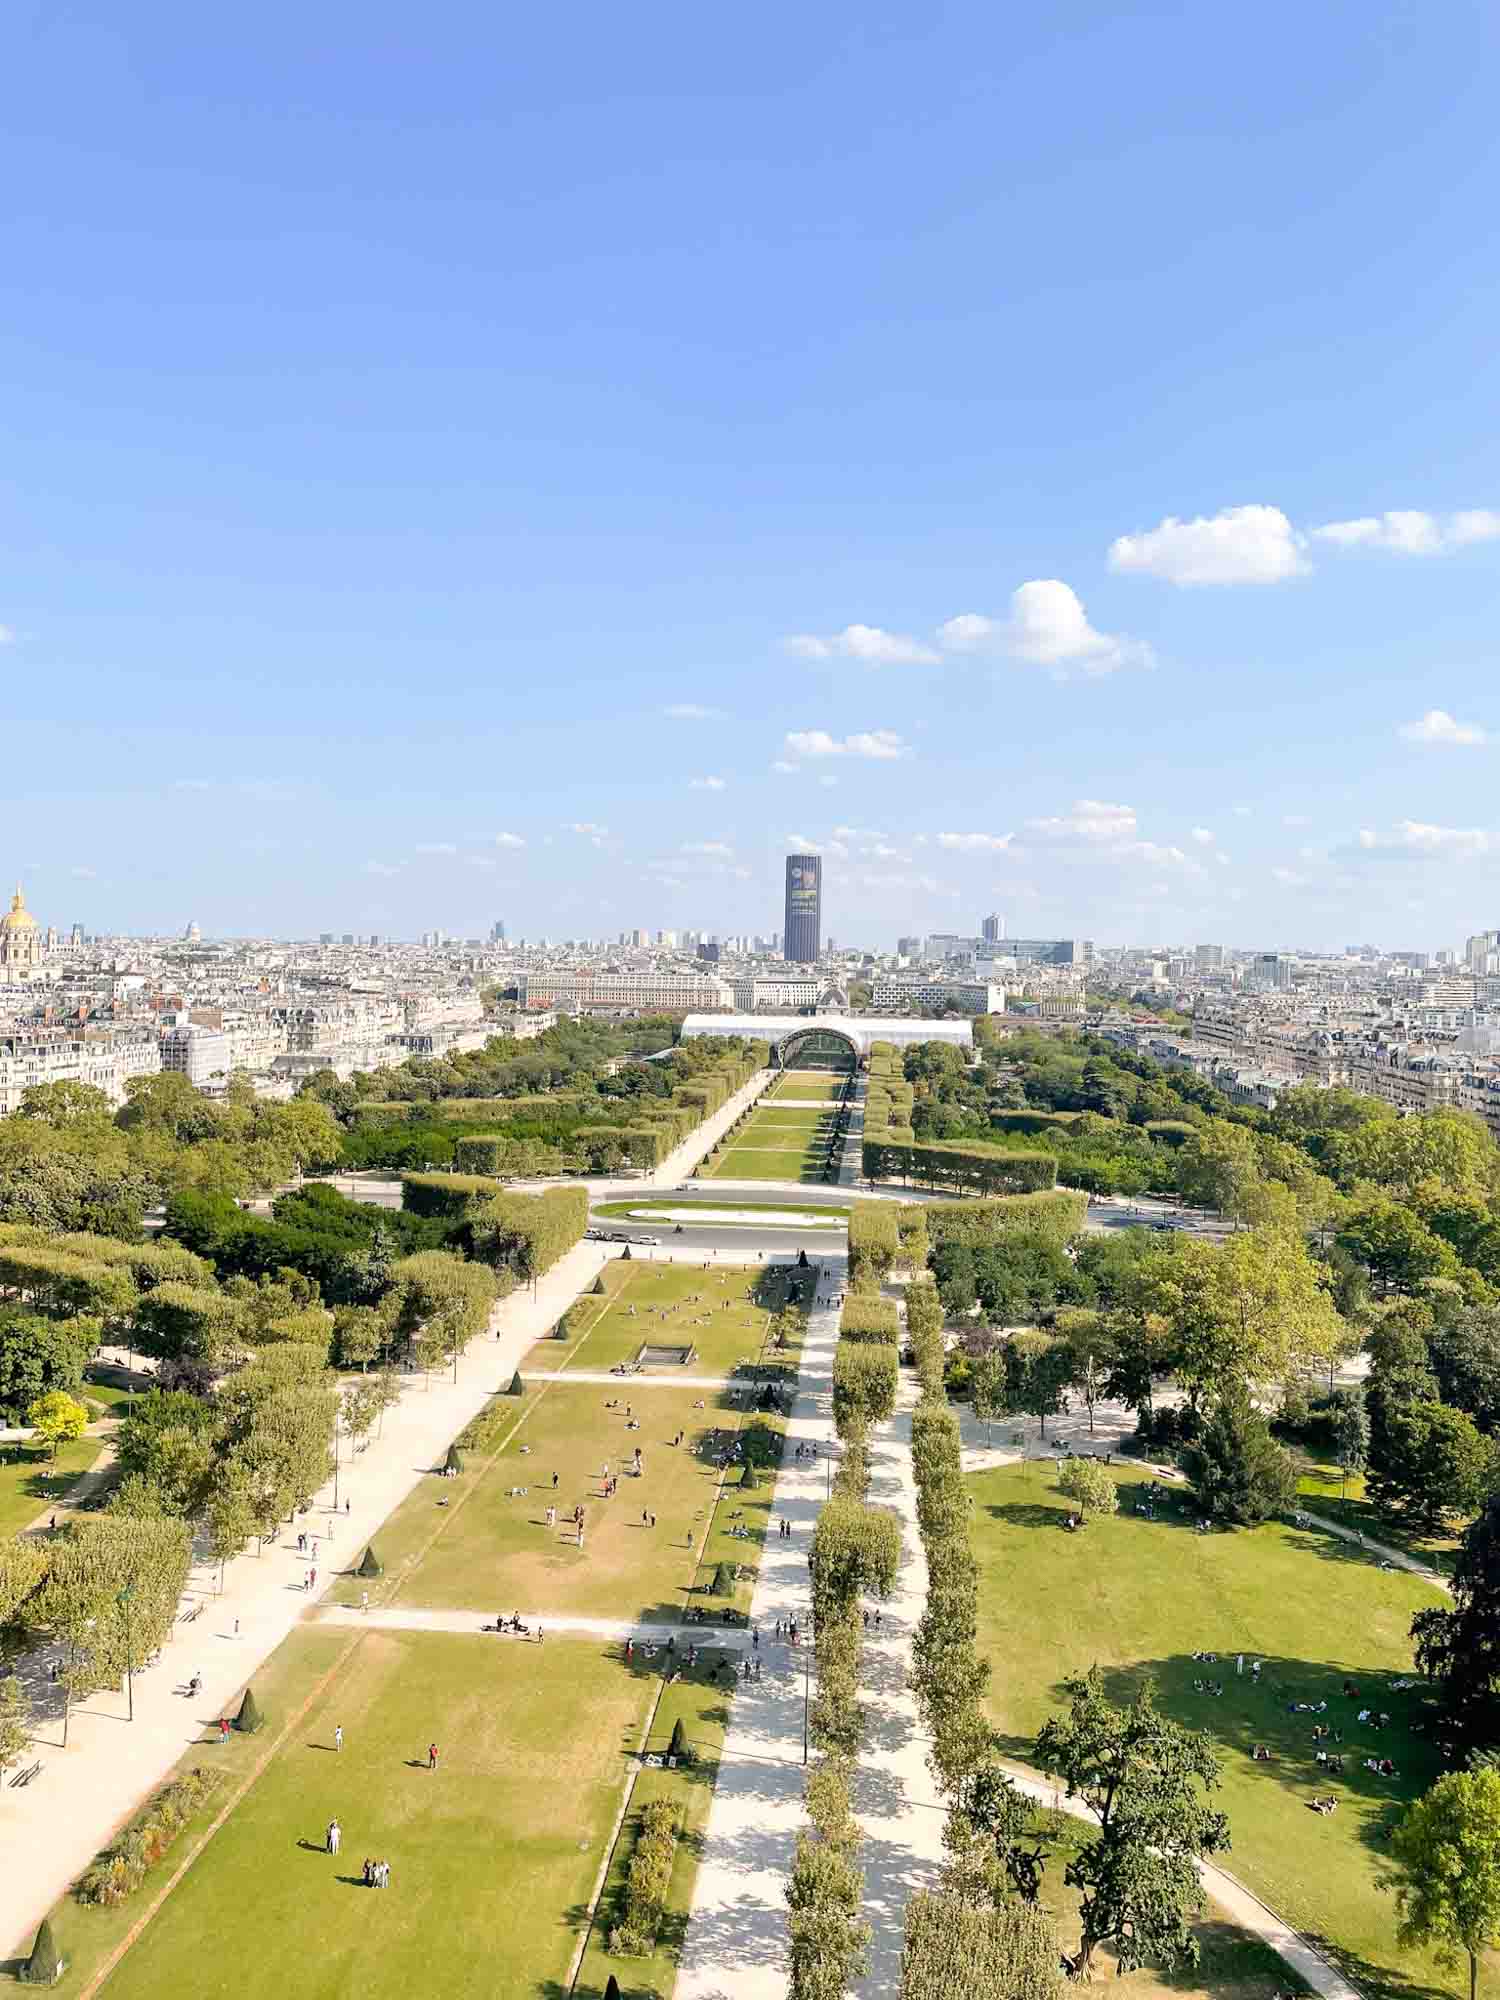 Views on champs de mar and Invalides from the Eiffel tower